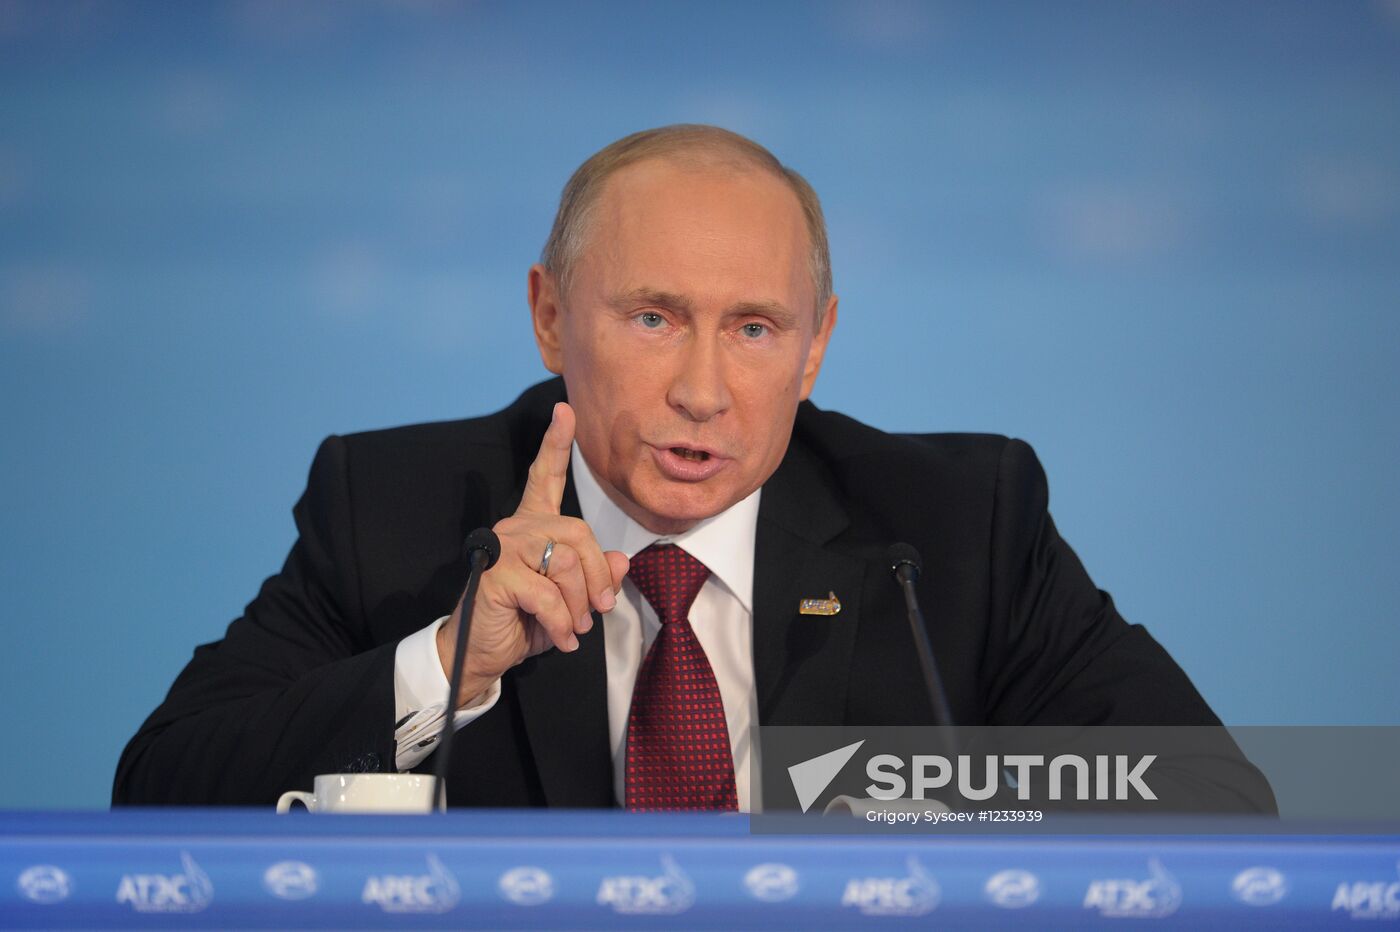 Russian President's news conference following APEC Leaders' Week